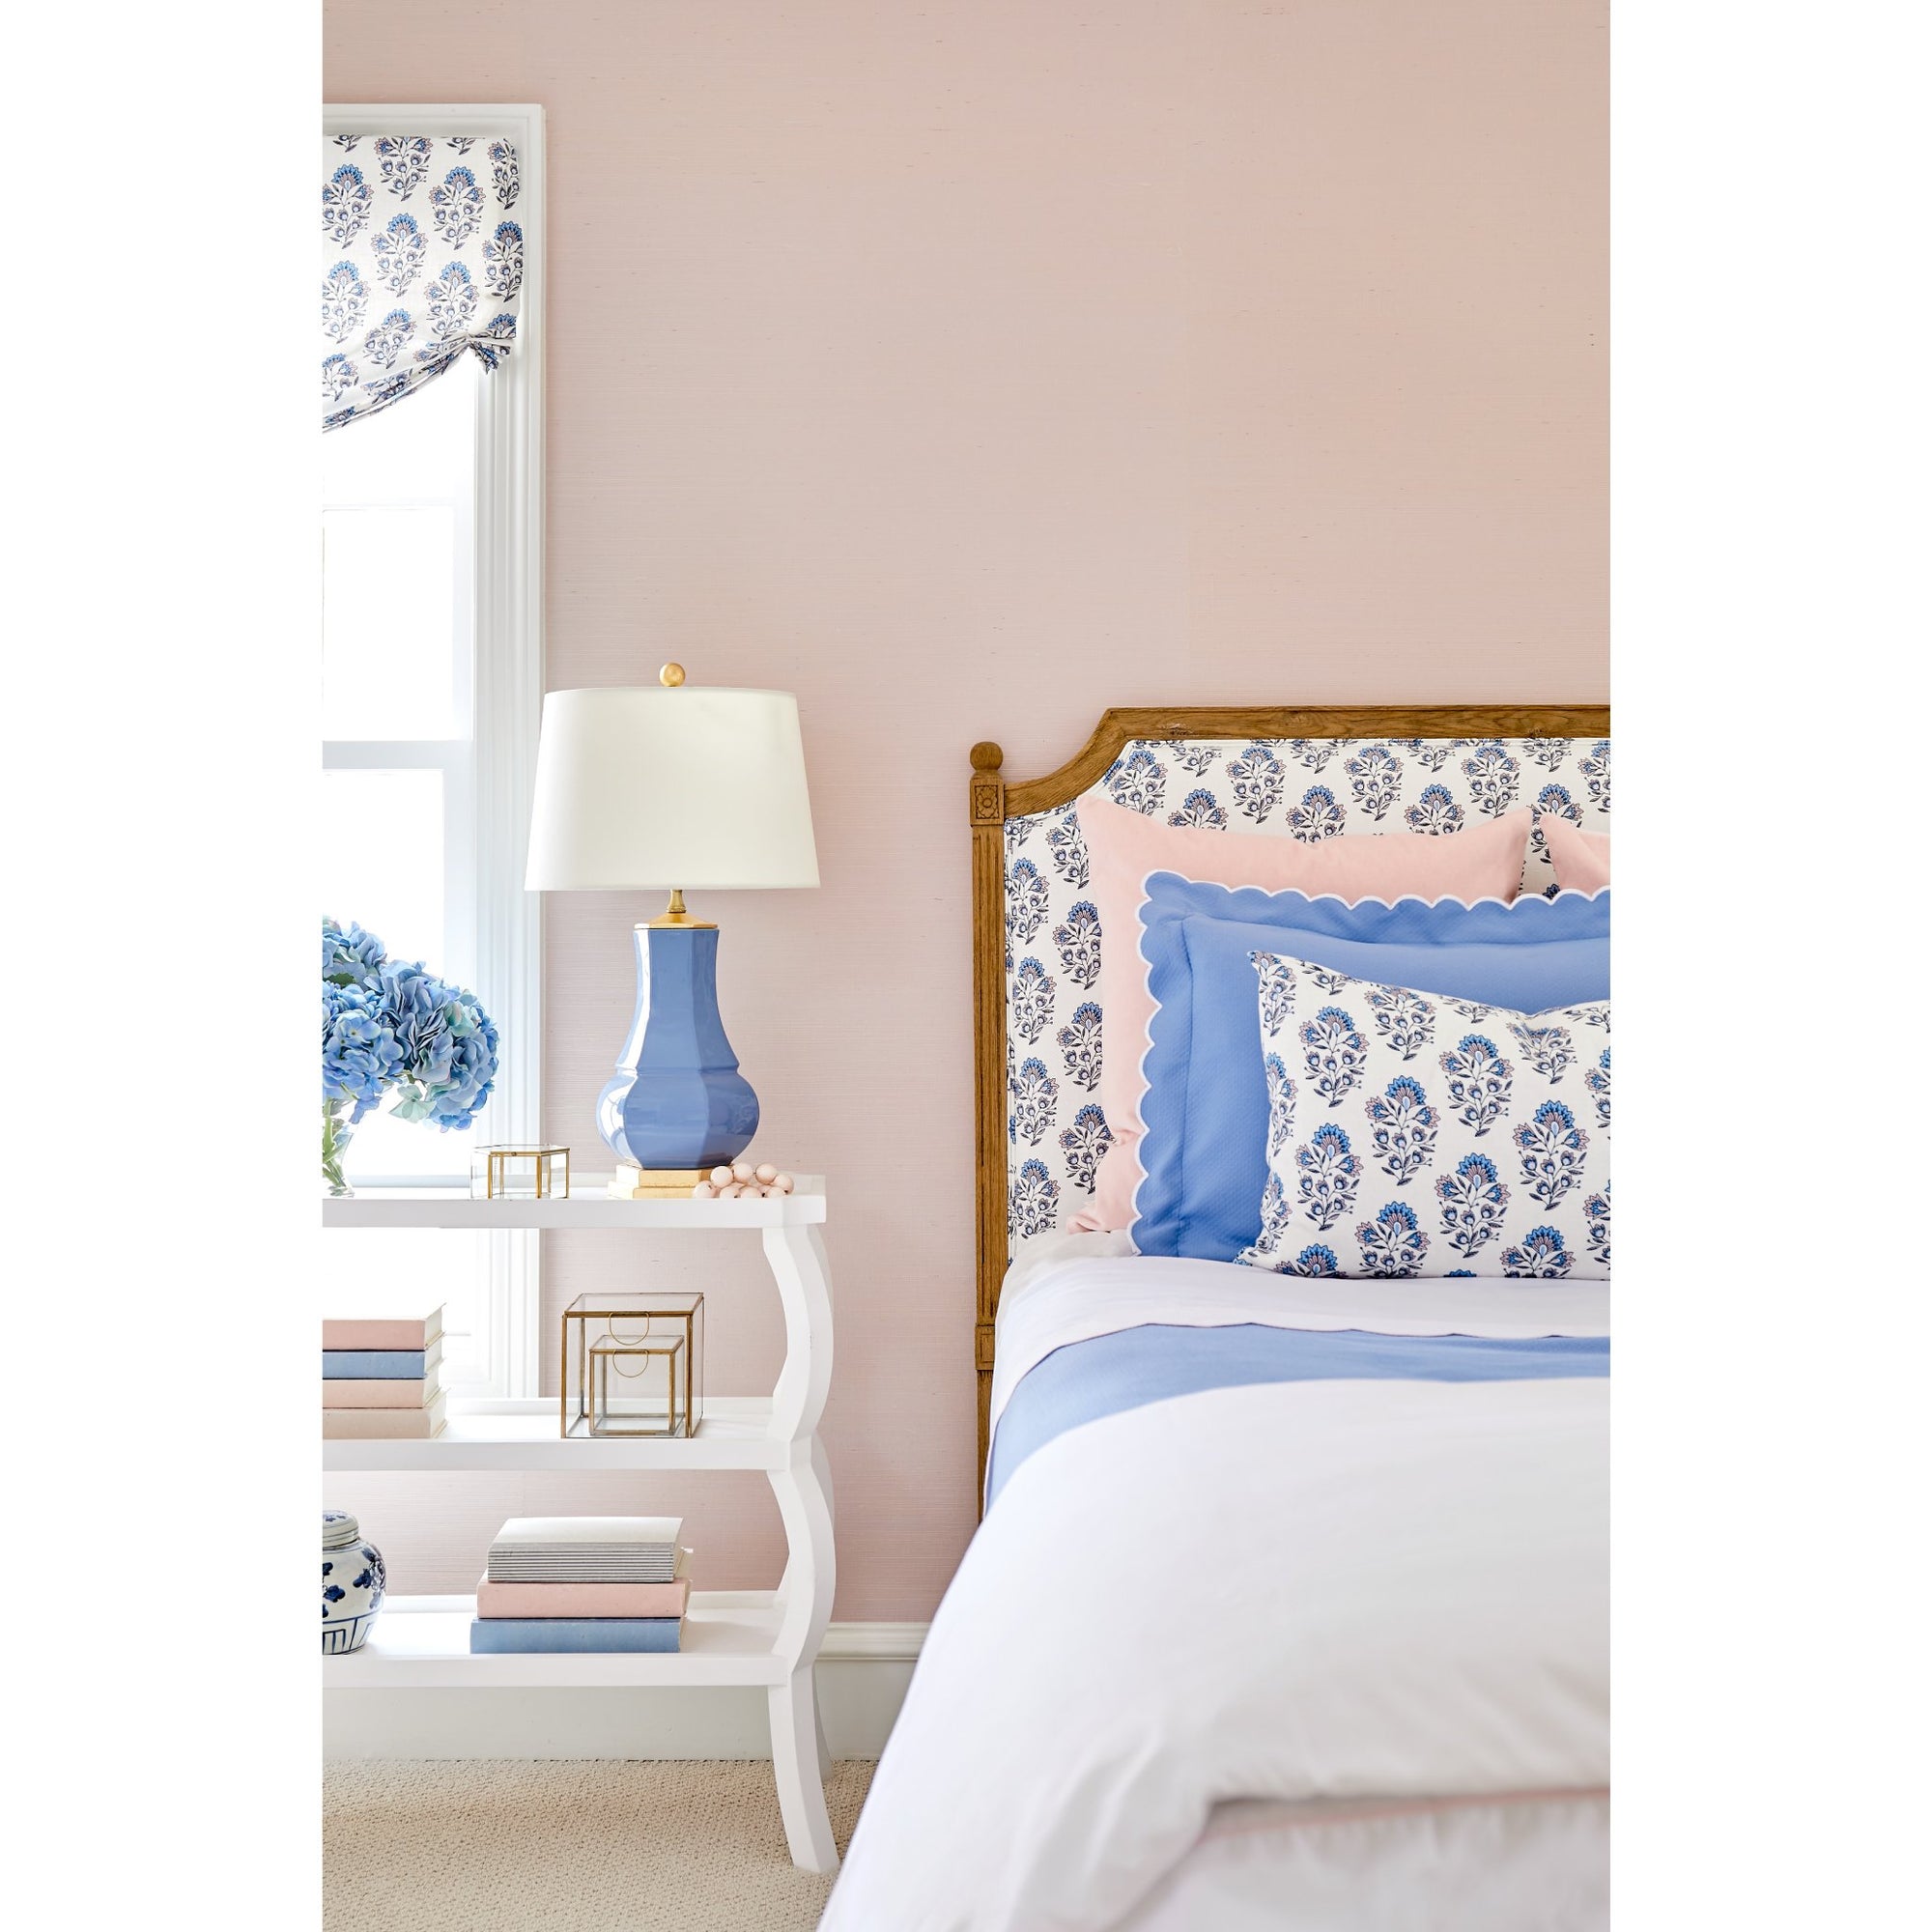 Grasscloth Wallpaper in Pale Rose on Wall Behind Bed